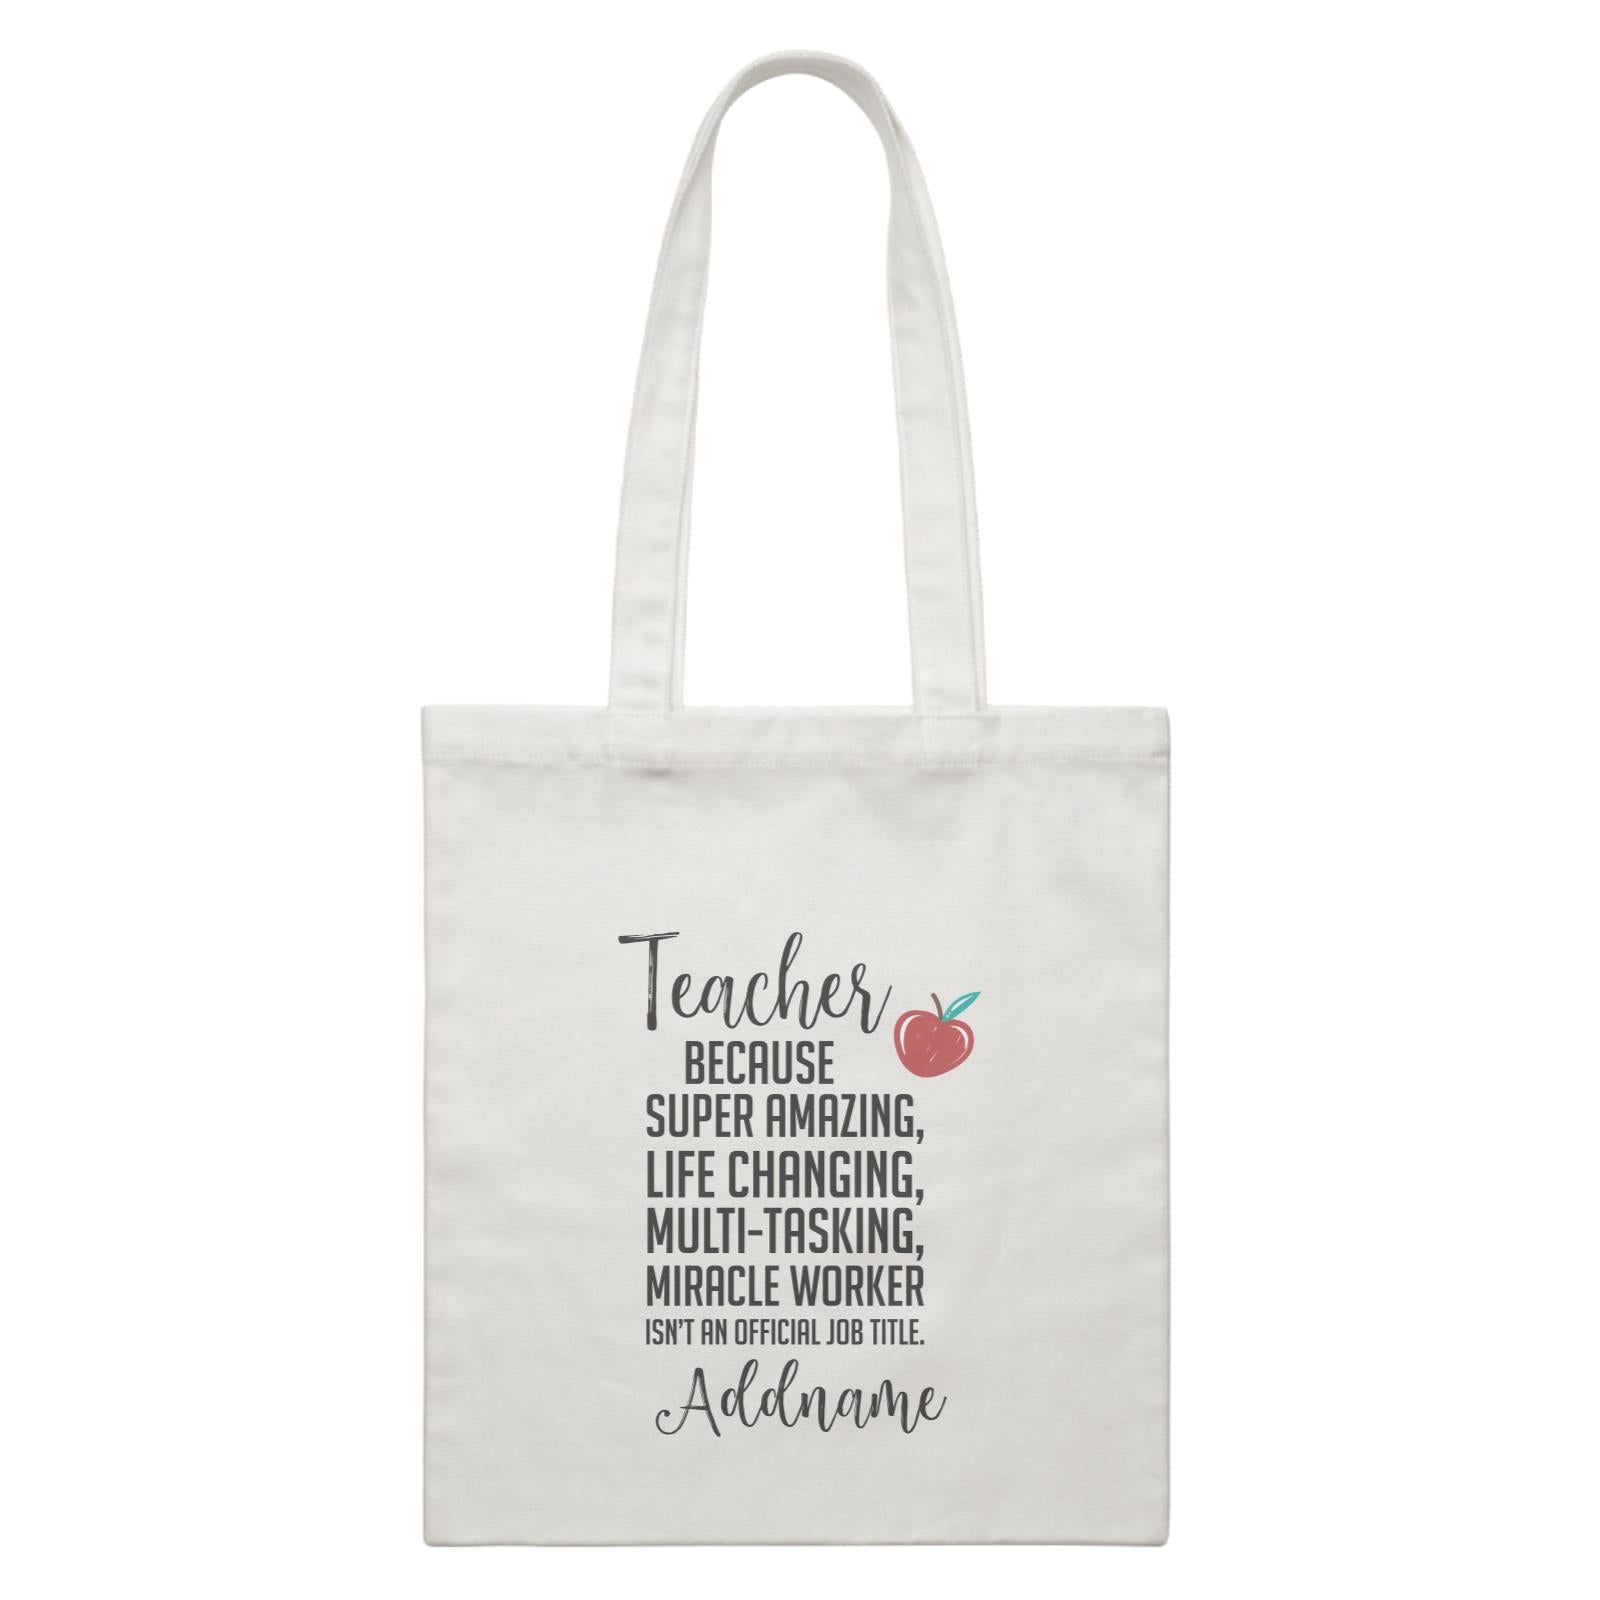 Teacher Quotes Teacher Miracle Worker Isn't An Official Job Title Addname White Canvas Bag